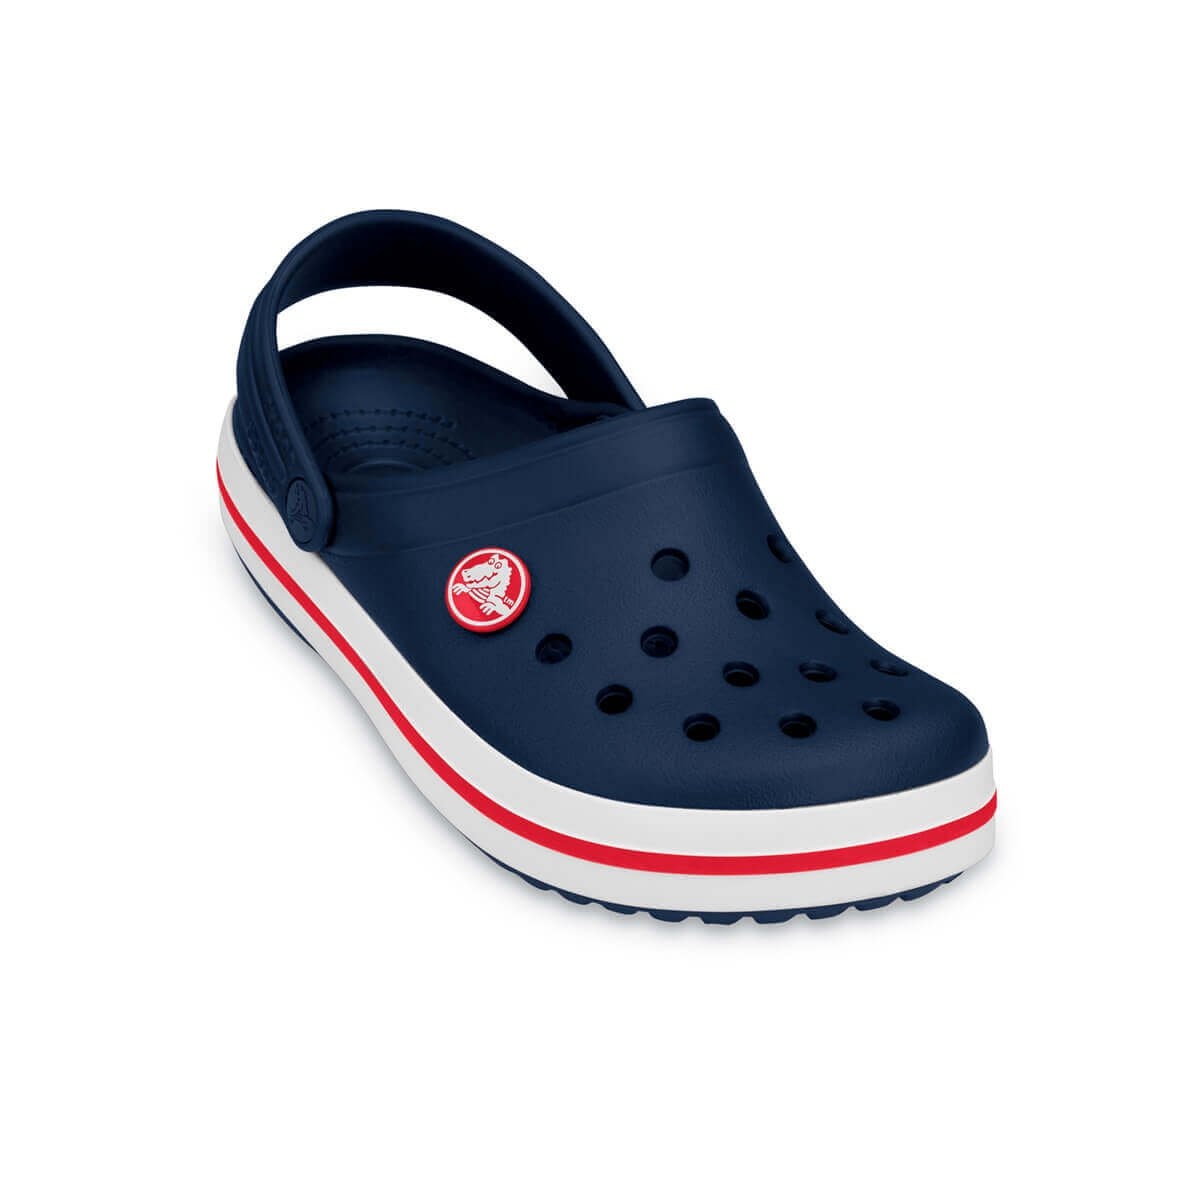 crocs sears Online shopping has never 